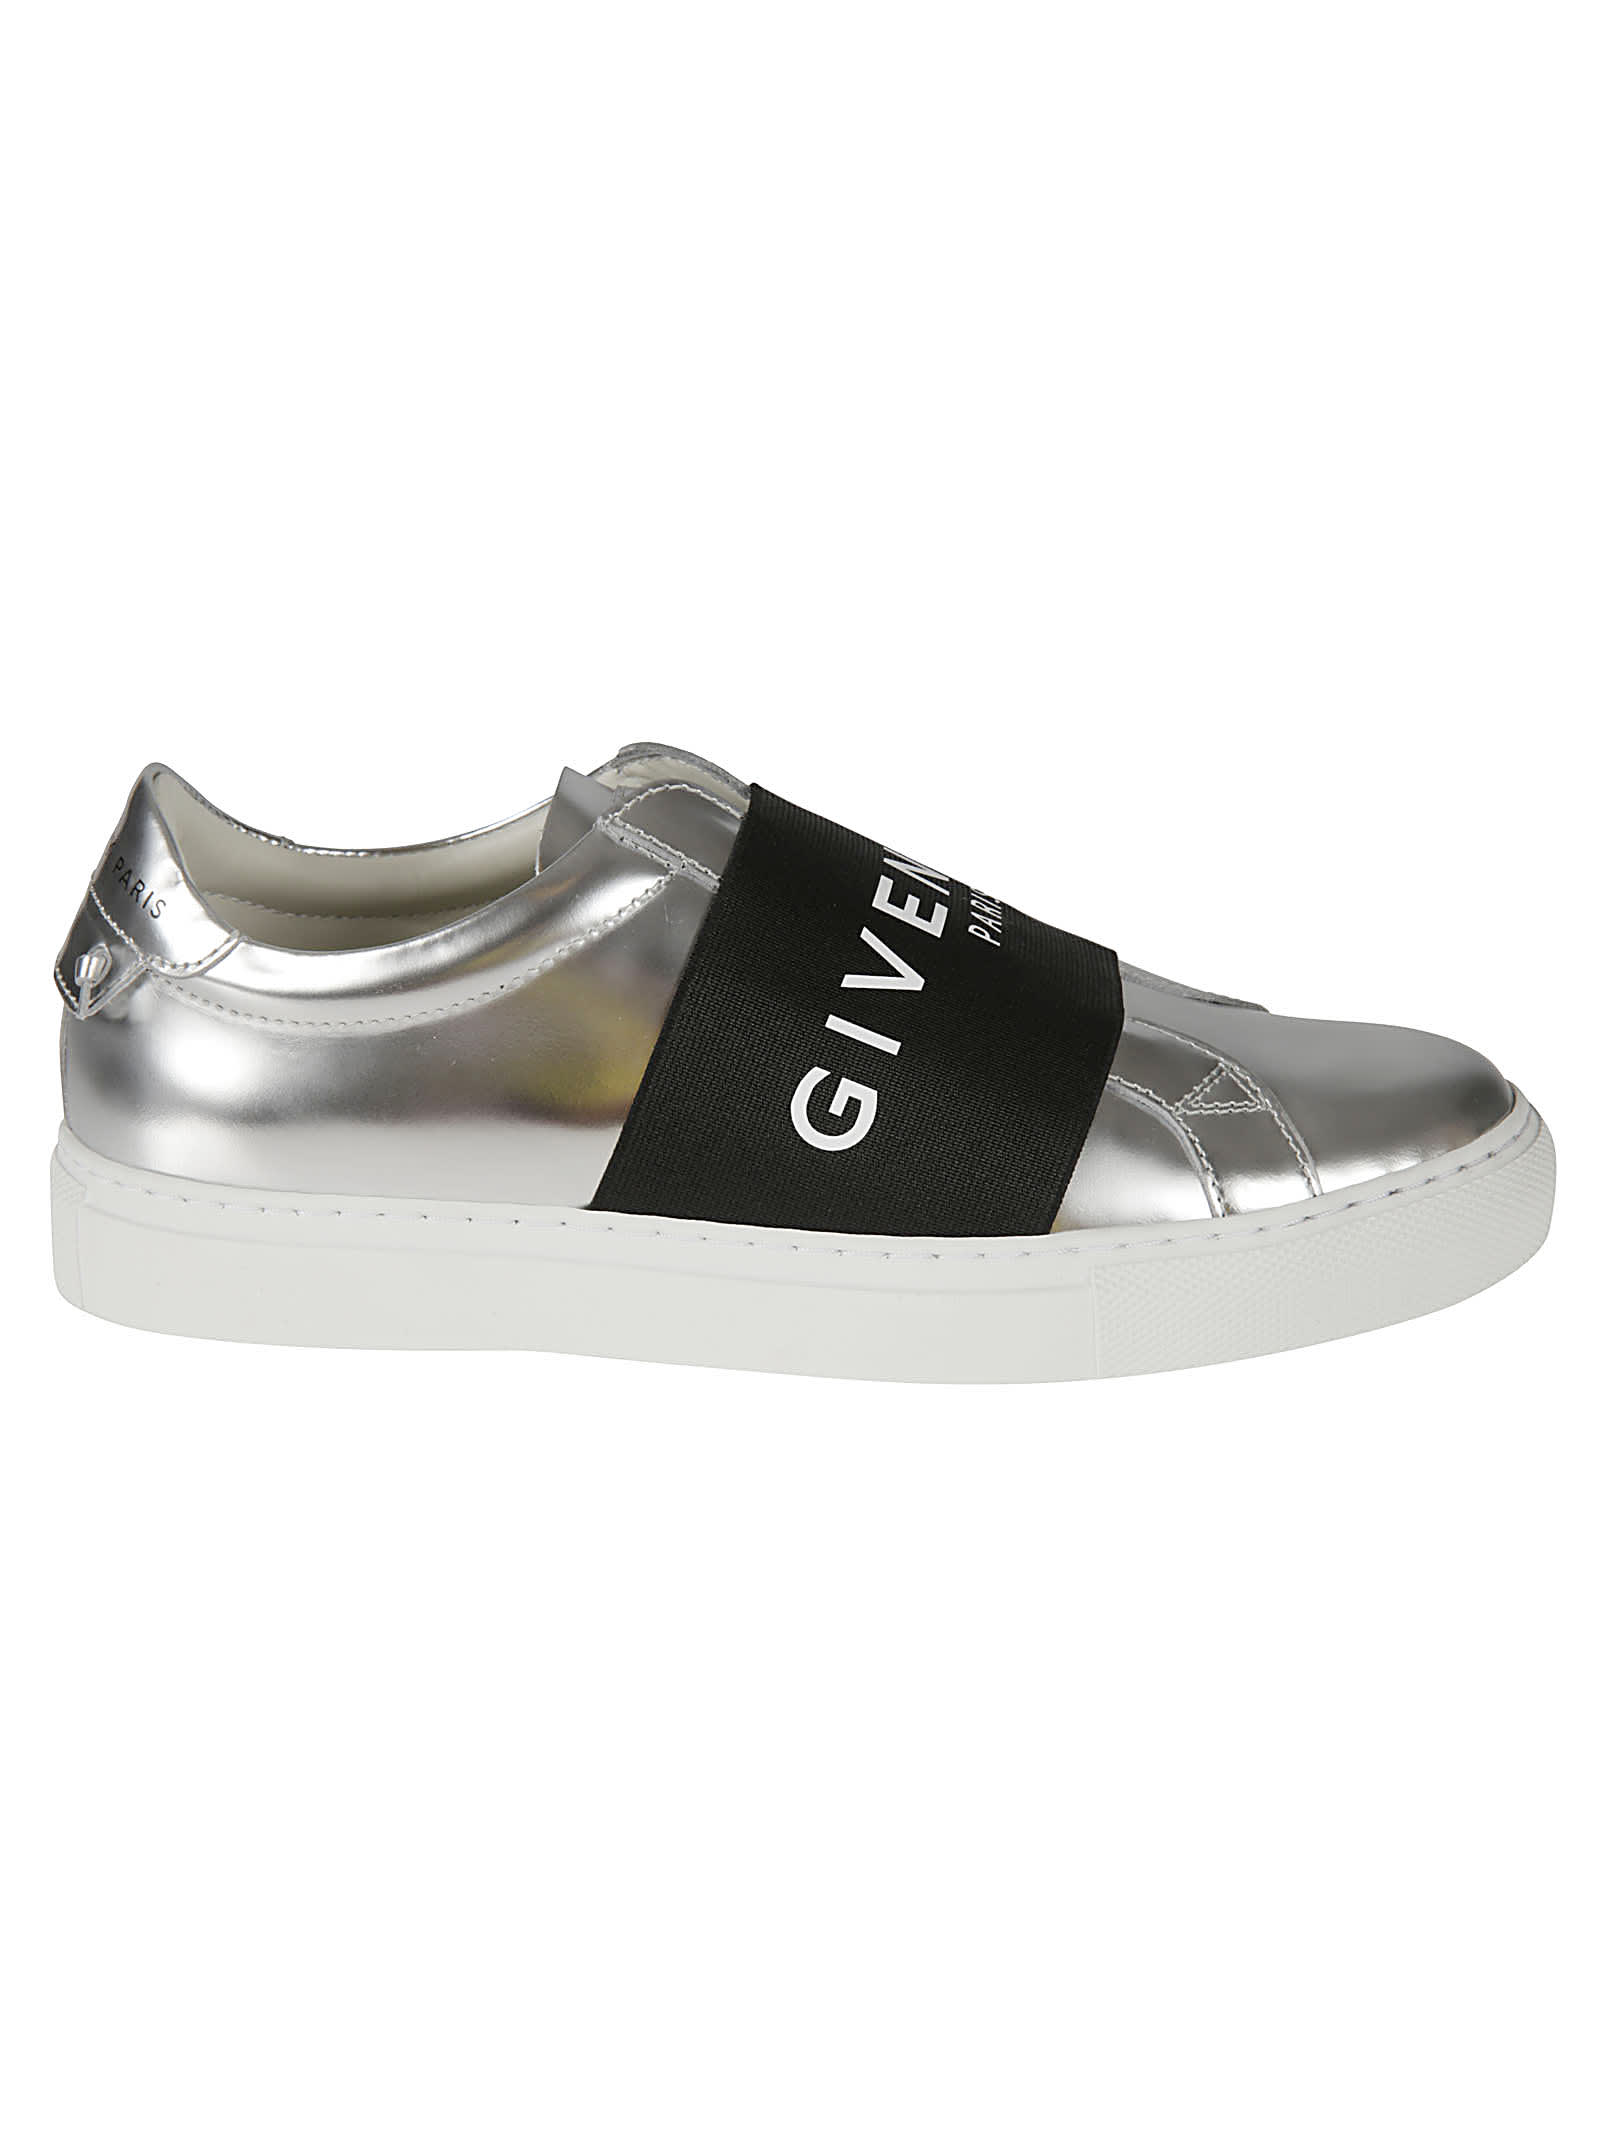 GIVENCHY URBAN STREET SNEAKERS,BE0005 E13T040